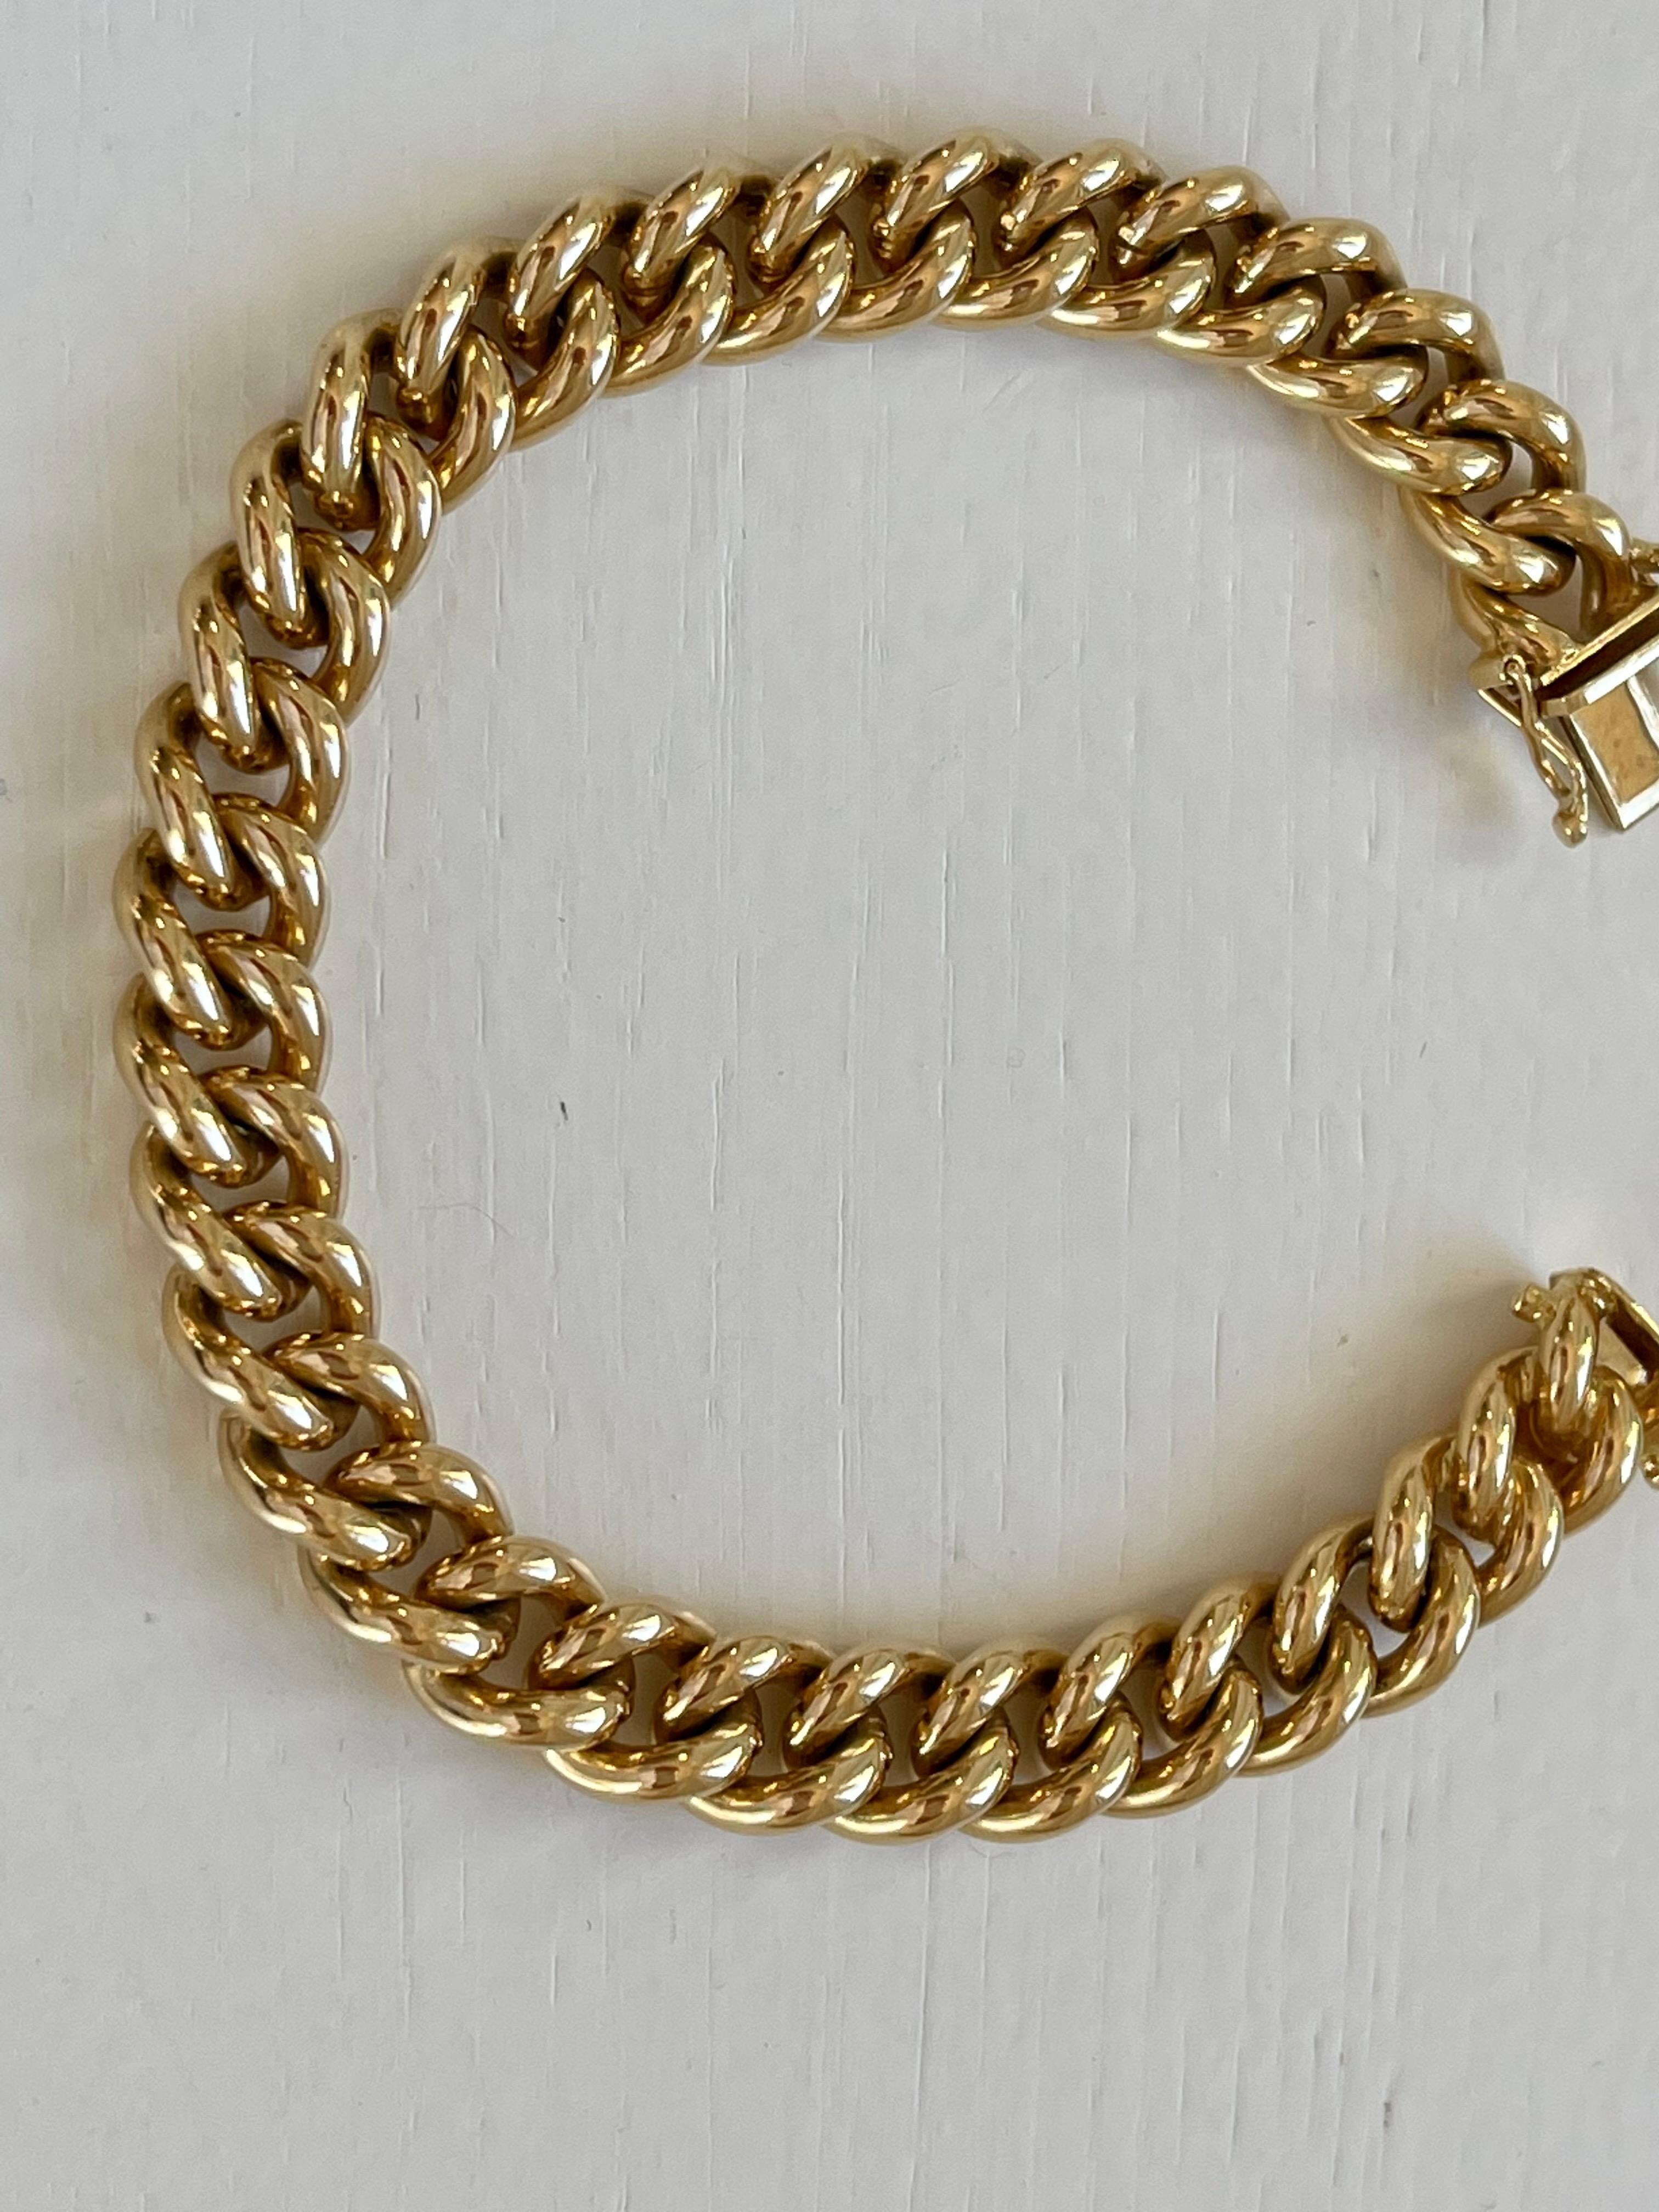 Solid 18 K yellow Gold Groumette Bracelet, a real evergreen! Signed A. Kurz Switzerland. Length: 18.5 cm. Weight: 67.60 grams. The link is 0.9 cm wide.
Masterfully handcrafted piece! Authenticity and money back is guaranteed.
For any enquires,